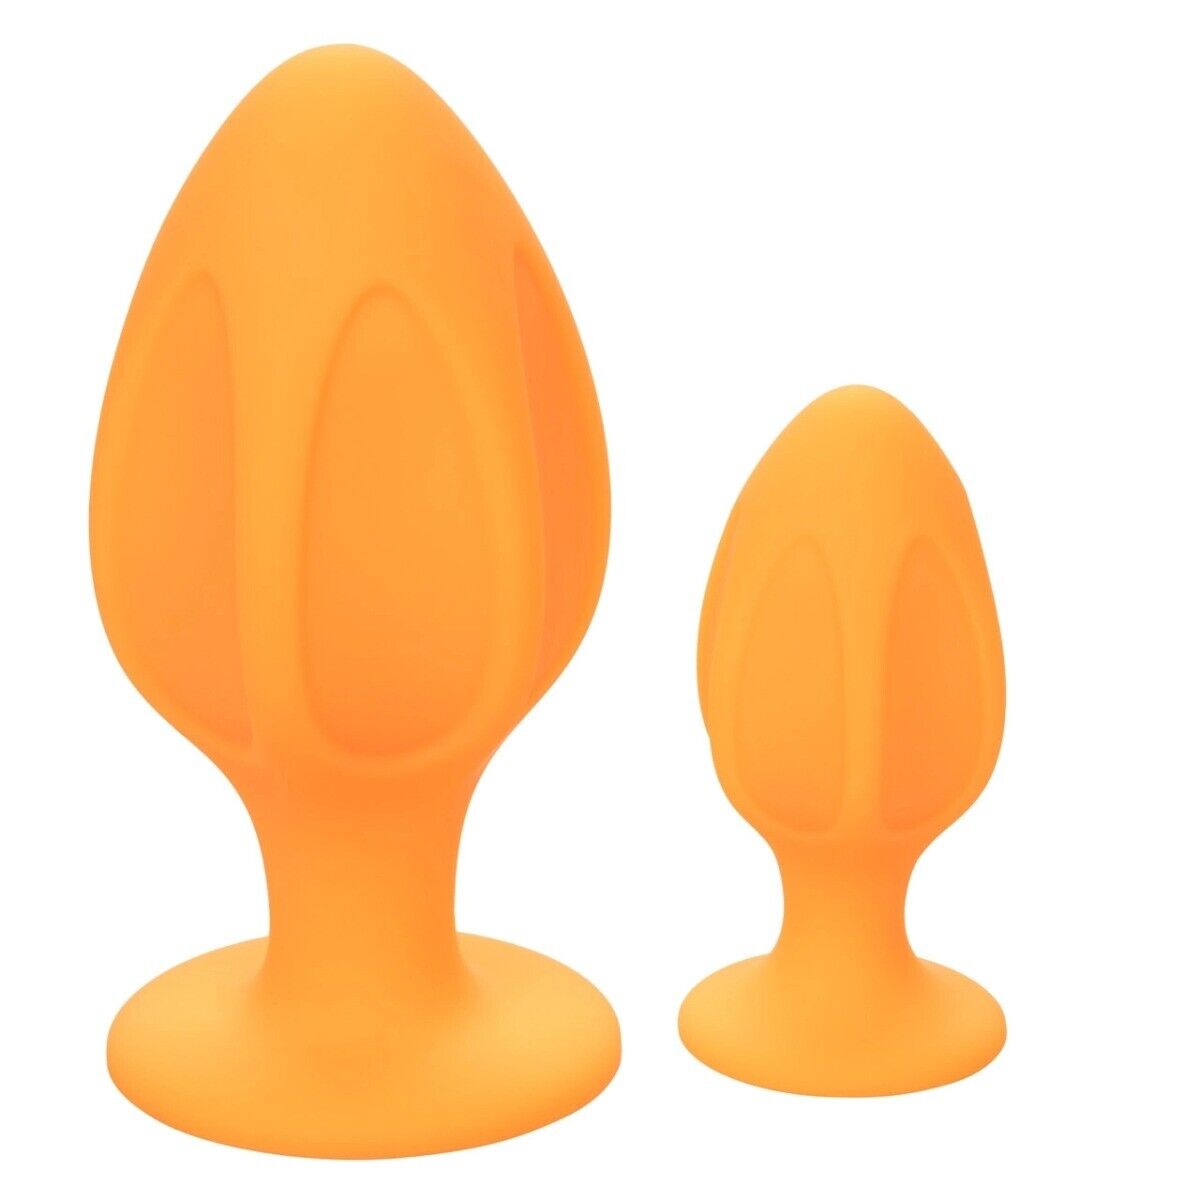 Silicone Anal Butt Plug Beginner Anal Training Set Sex Toys for Men Women Couple